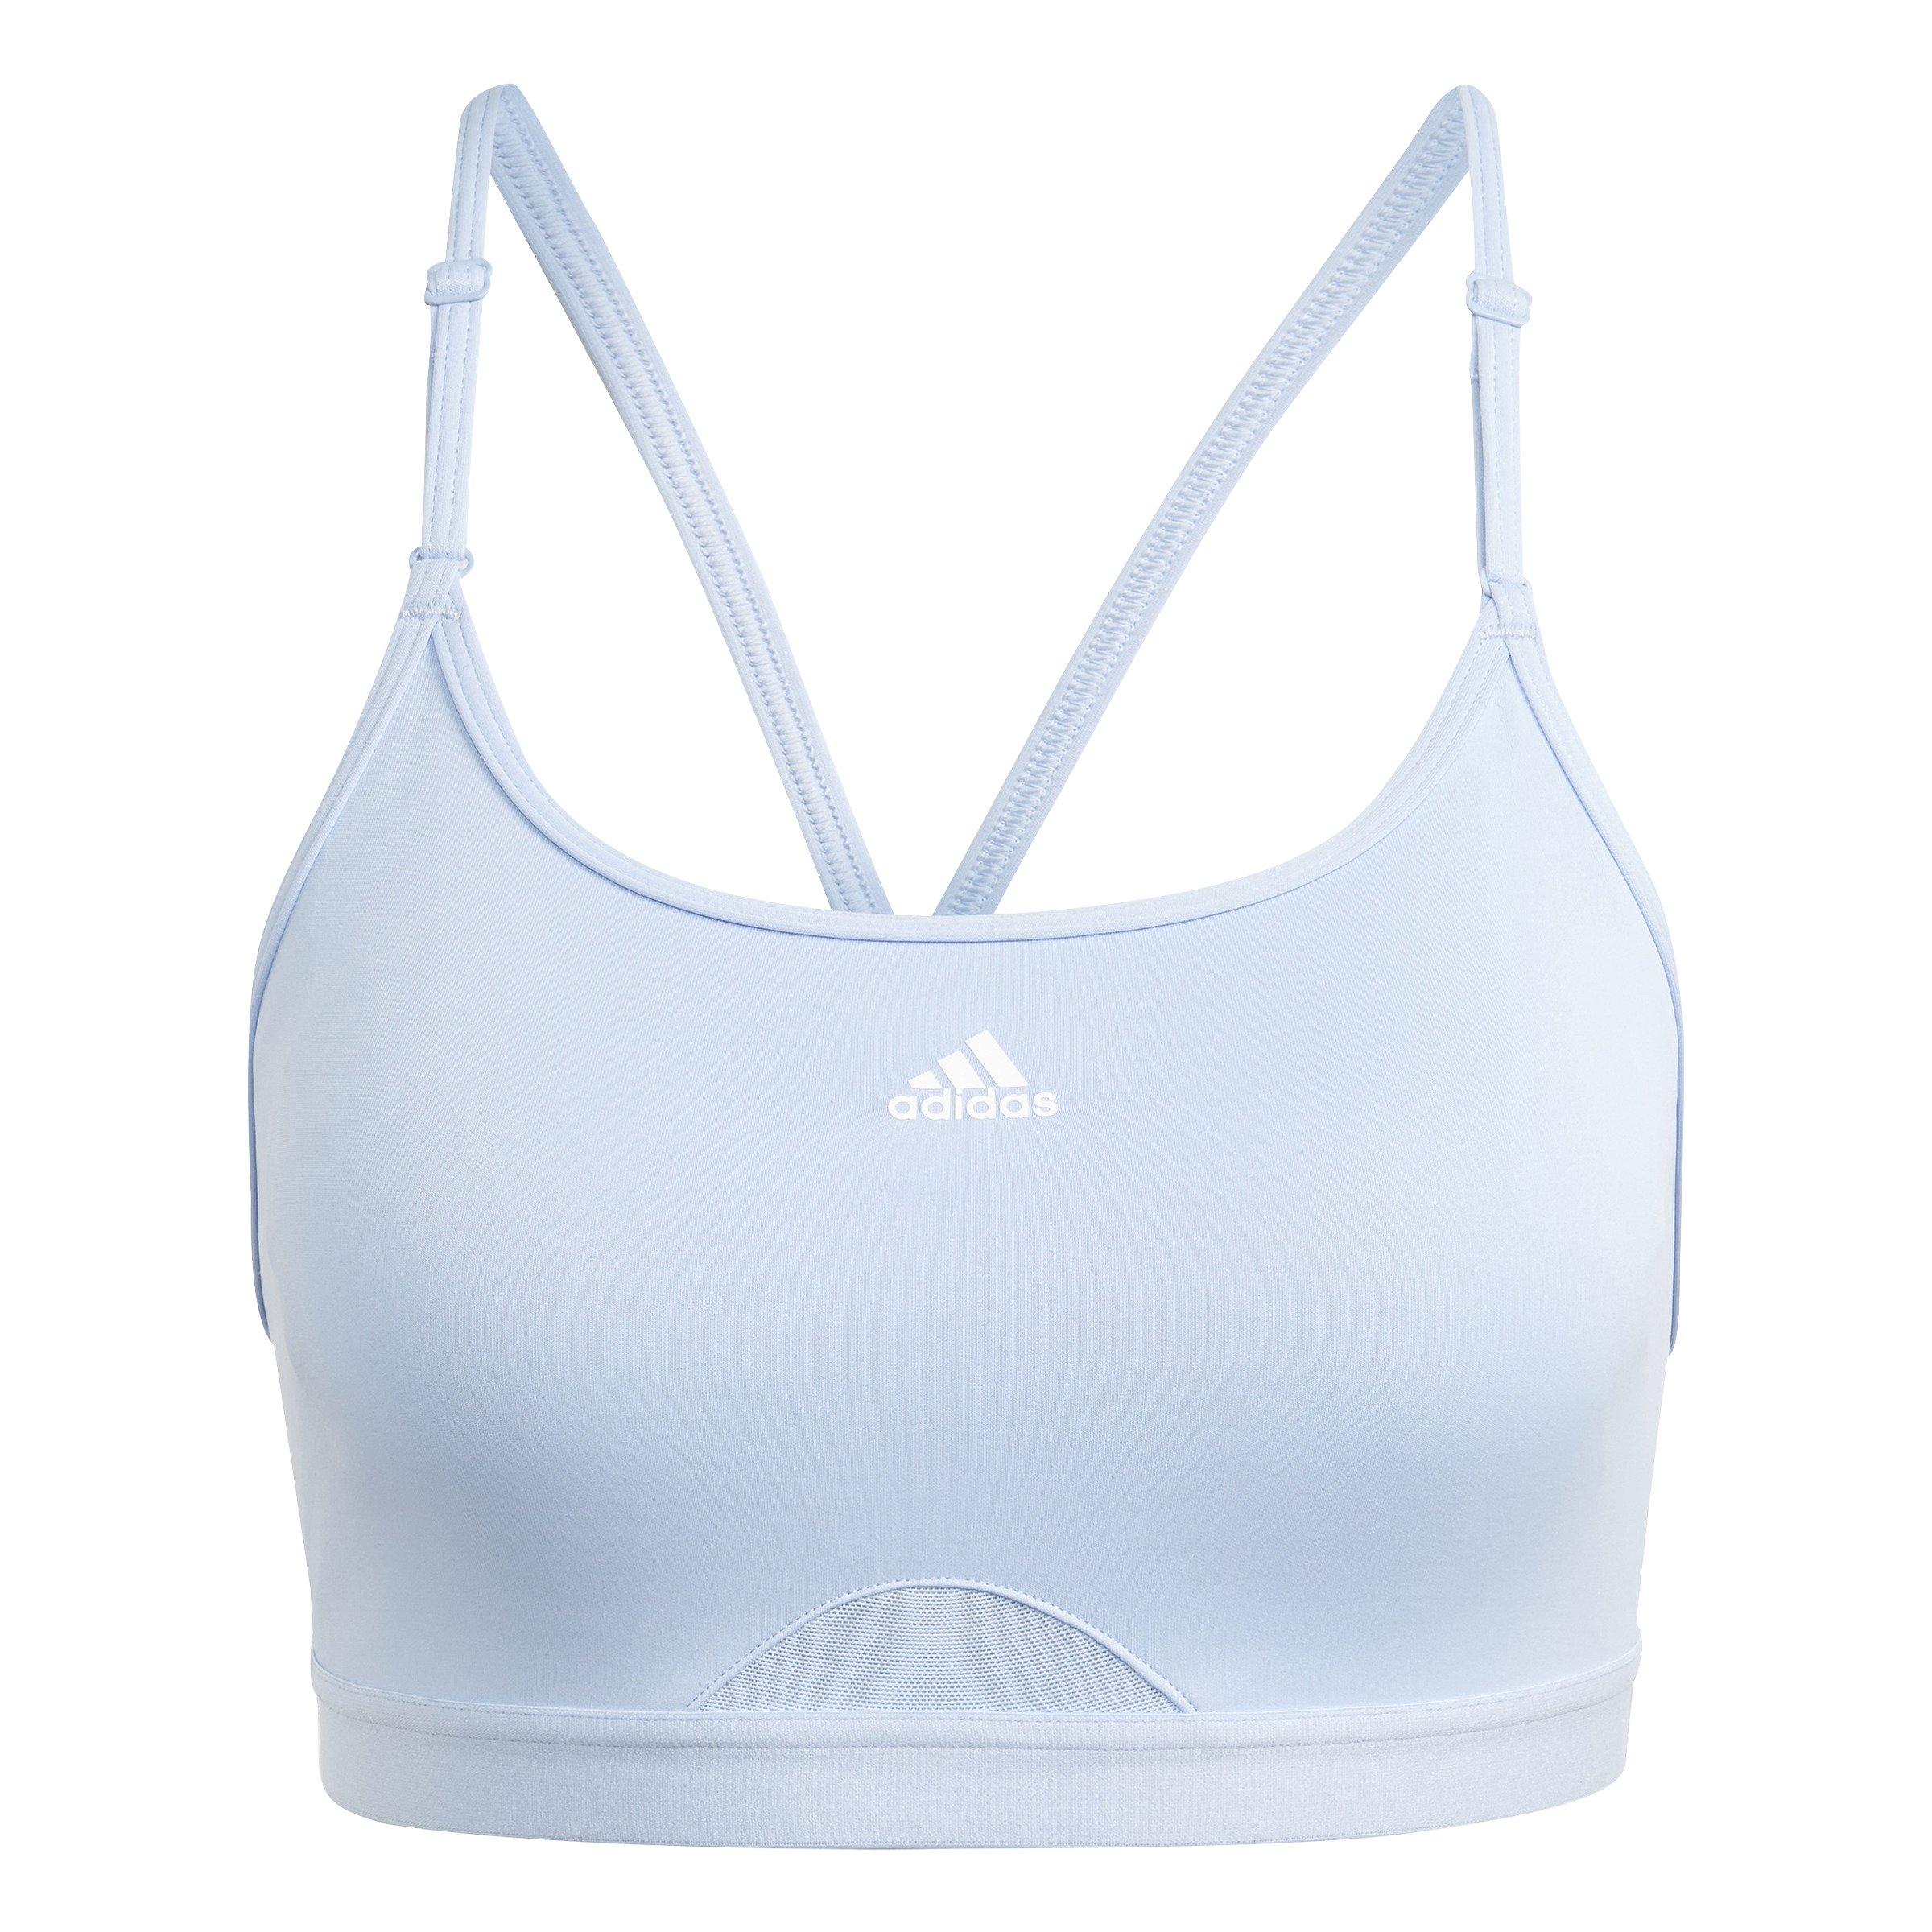  Lightning Deals of Today Clearance Warehouse Warehouse Worker  Essentials Racerback Sports Bras for Women - Padded Seamless High Impact  Support for Yoga Gym Workout Fitness : Sports & Outdoors